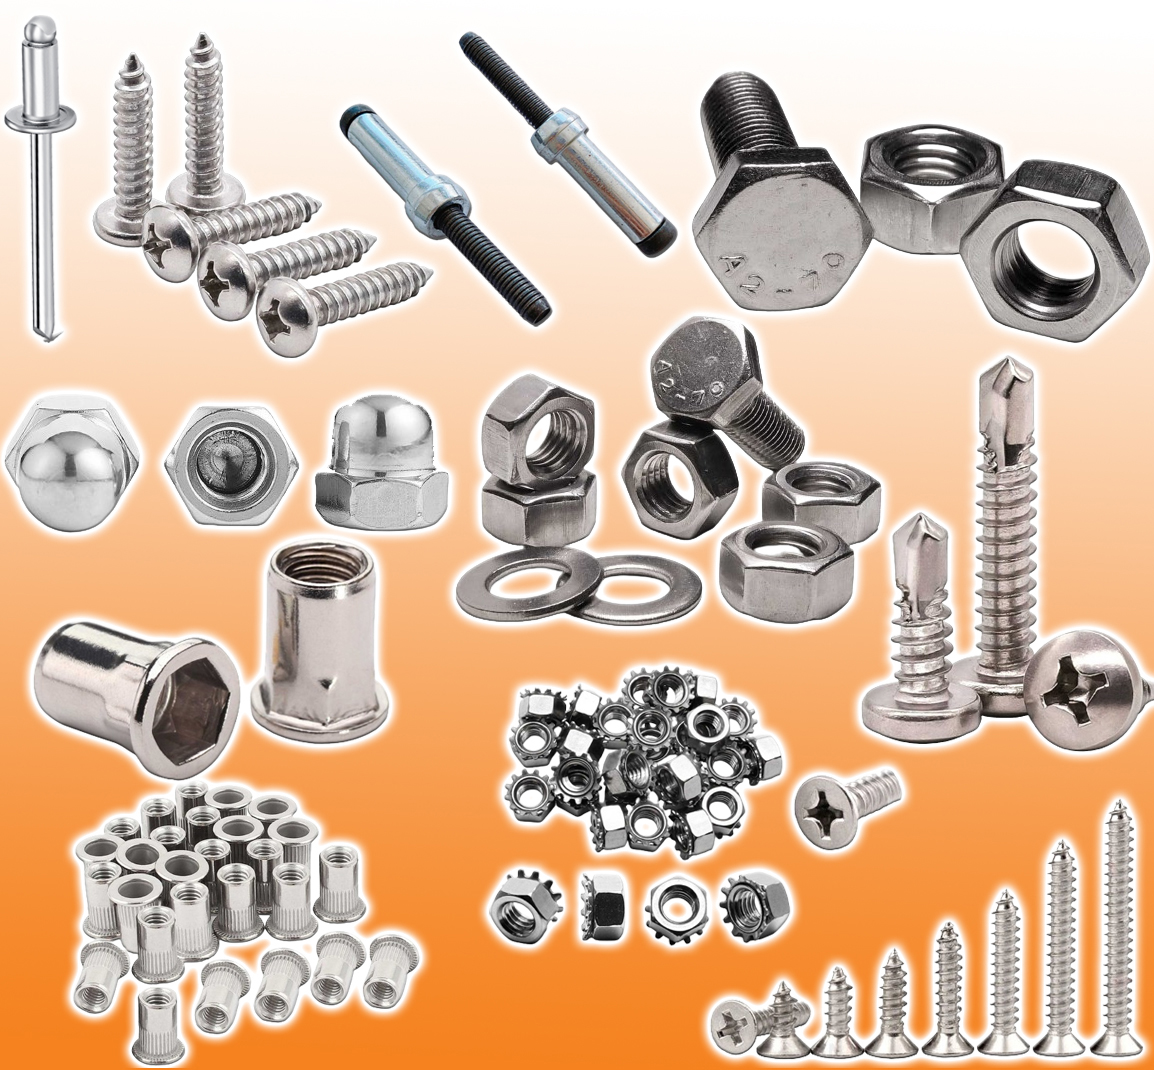 Fastener manufacturers & Suppliers in Pune India